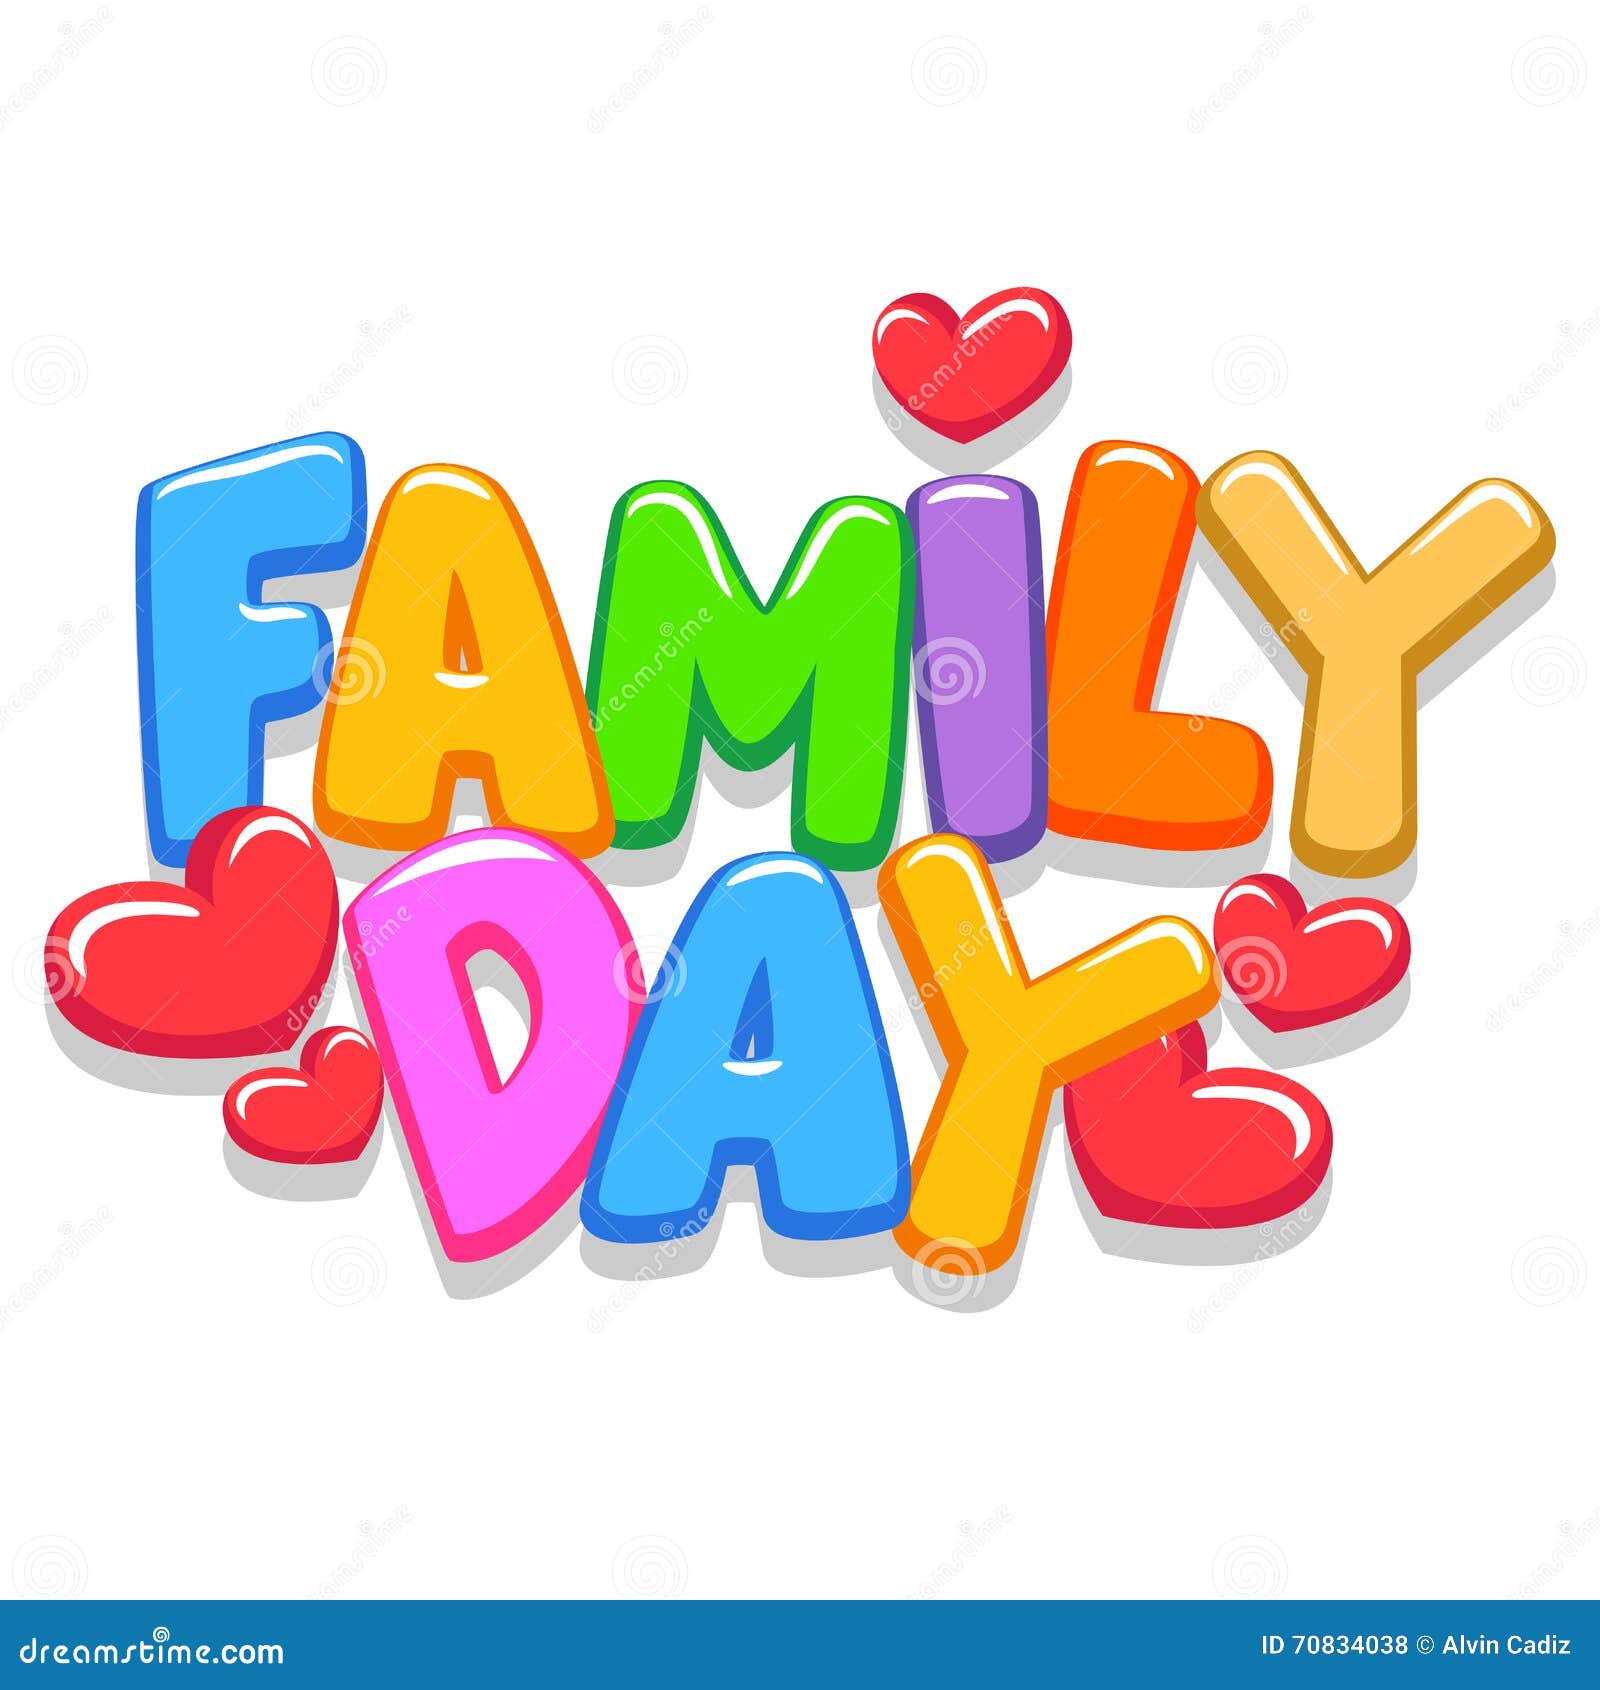 free clipart for family and friends day - photo #29